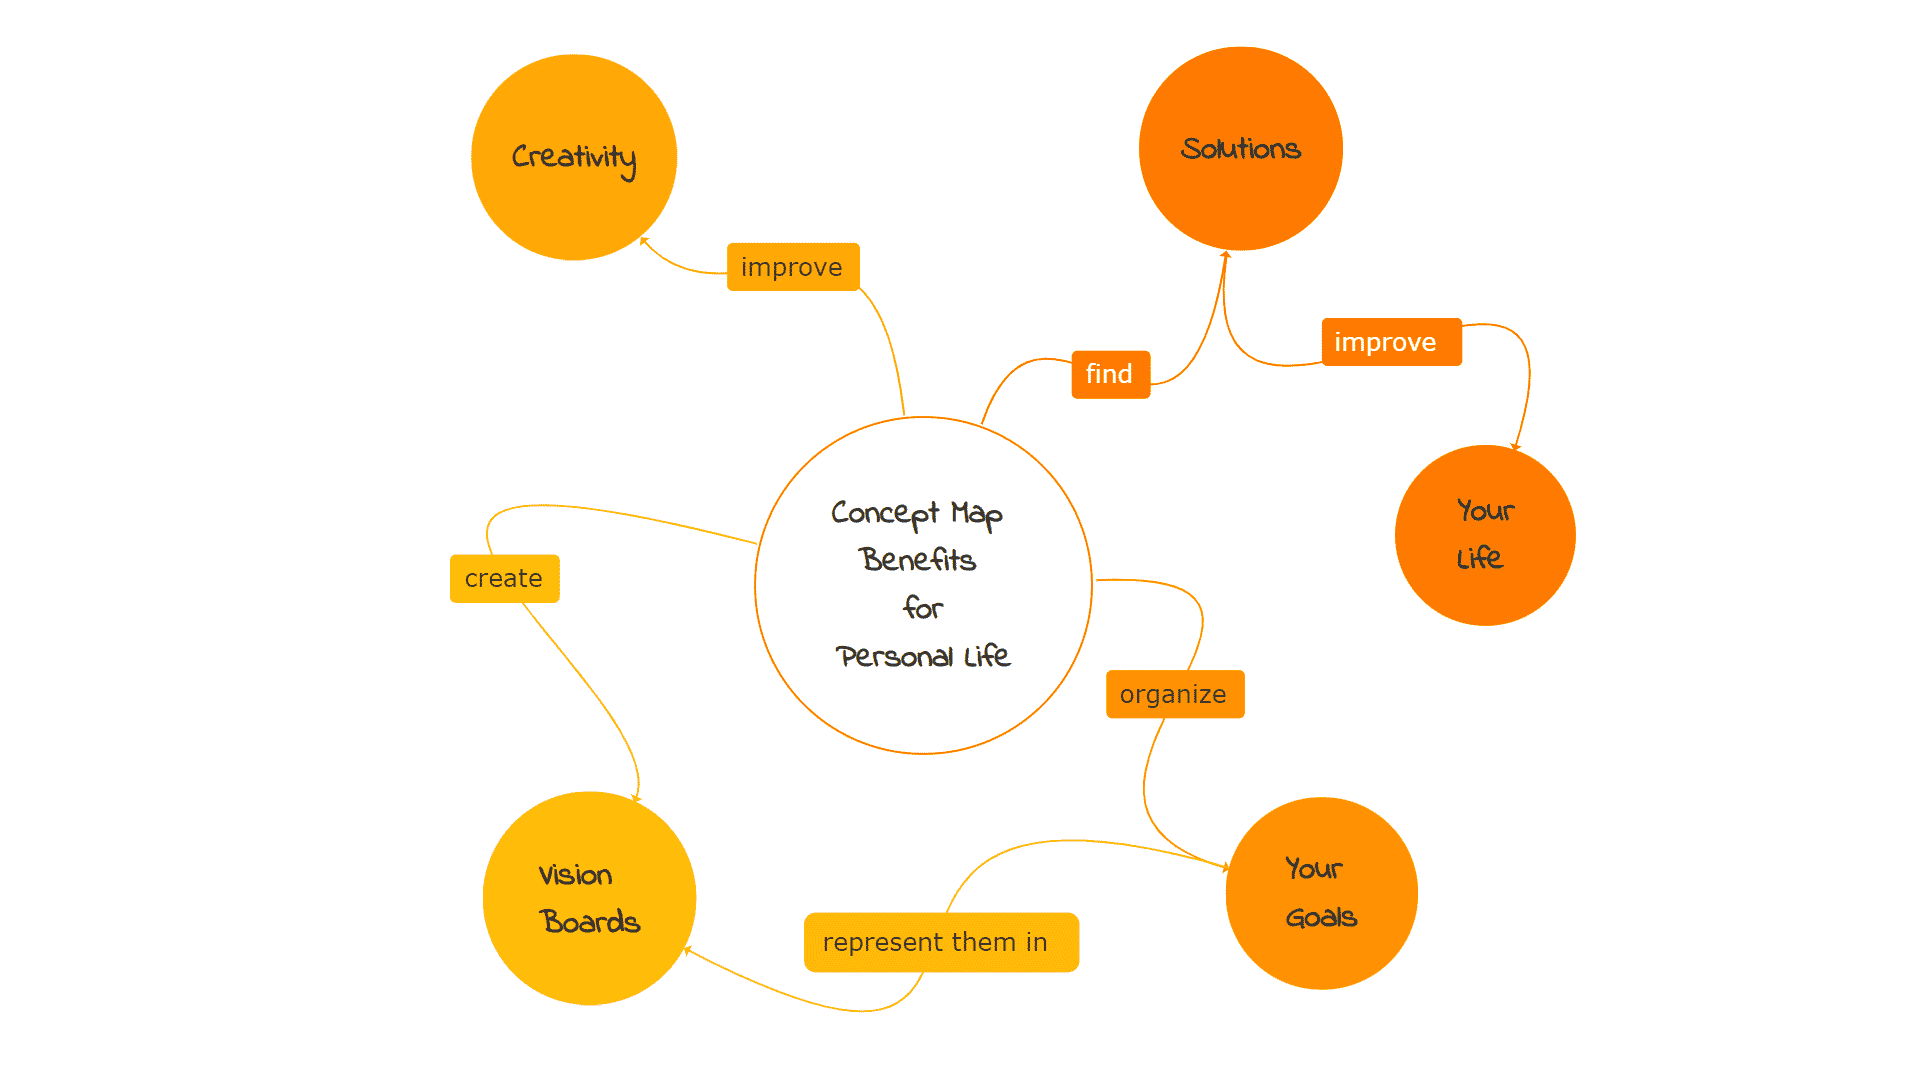 Benefits of Personal Life Concept Map